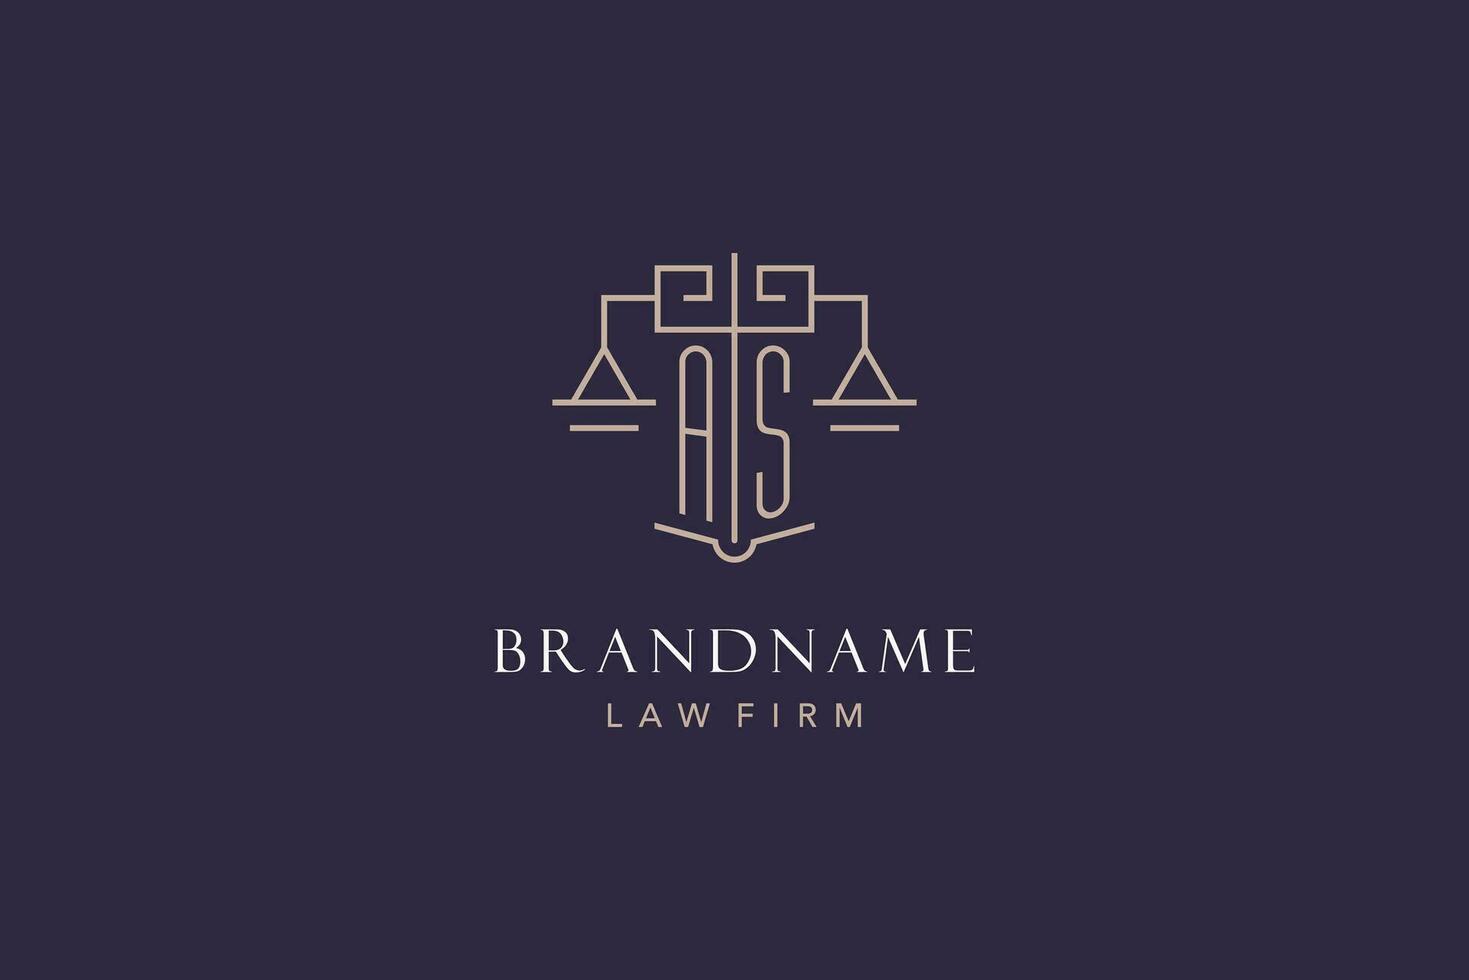 Initial letter AS logo with scale of justice logo design, luxury legal logo geometric style vector